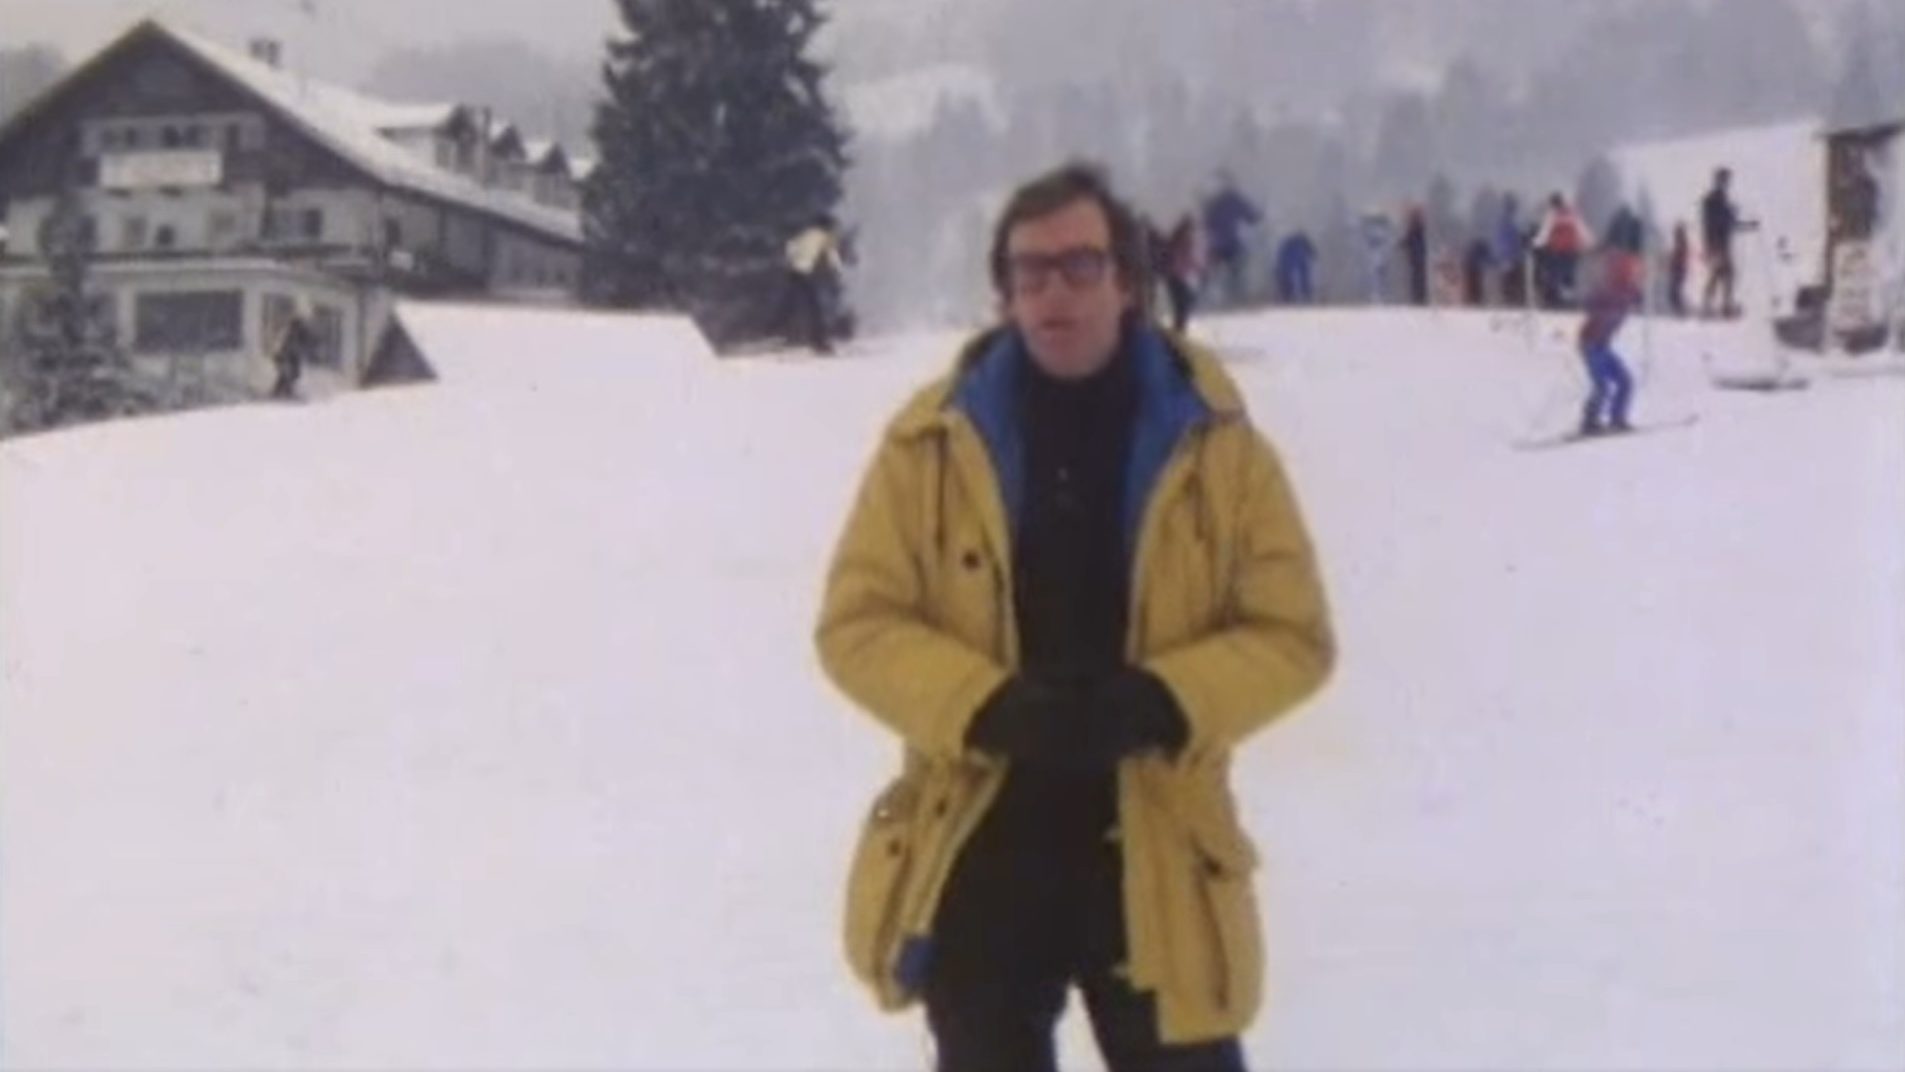 David Vine introduces the first-ever episode of Ski Sunday on January 15, 1978. Pic: BBC Archive